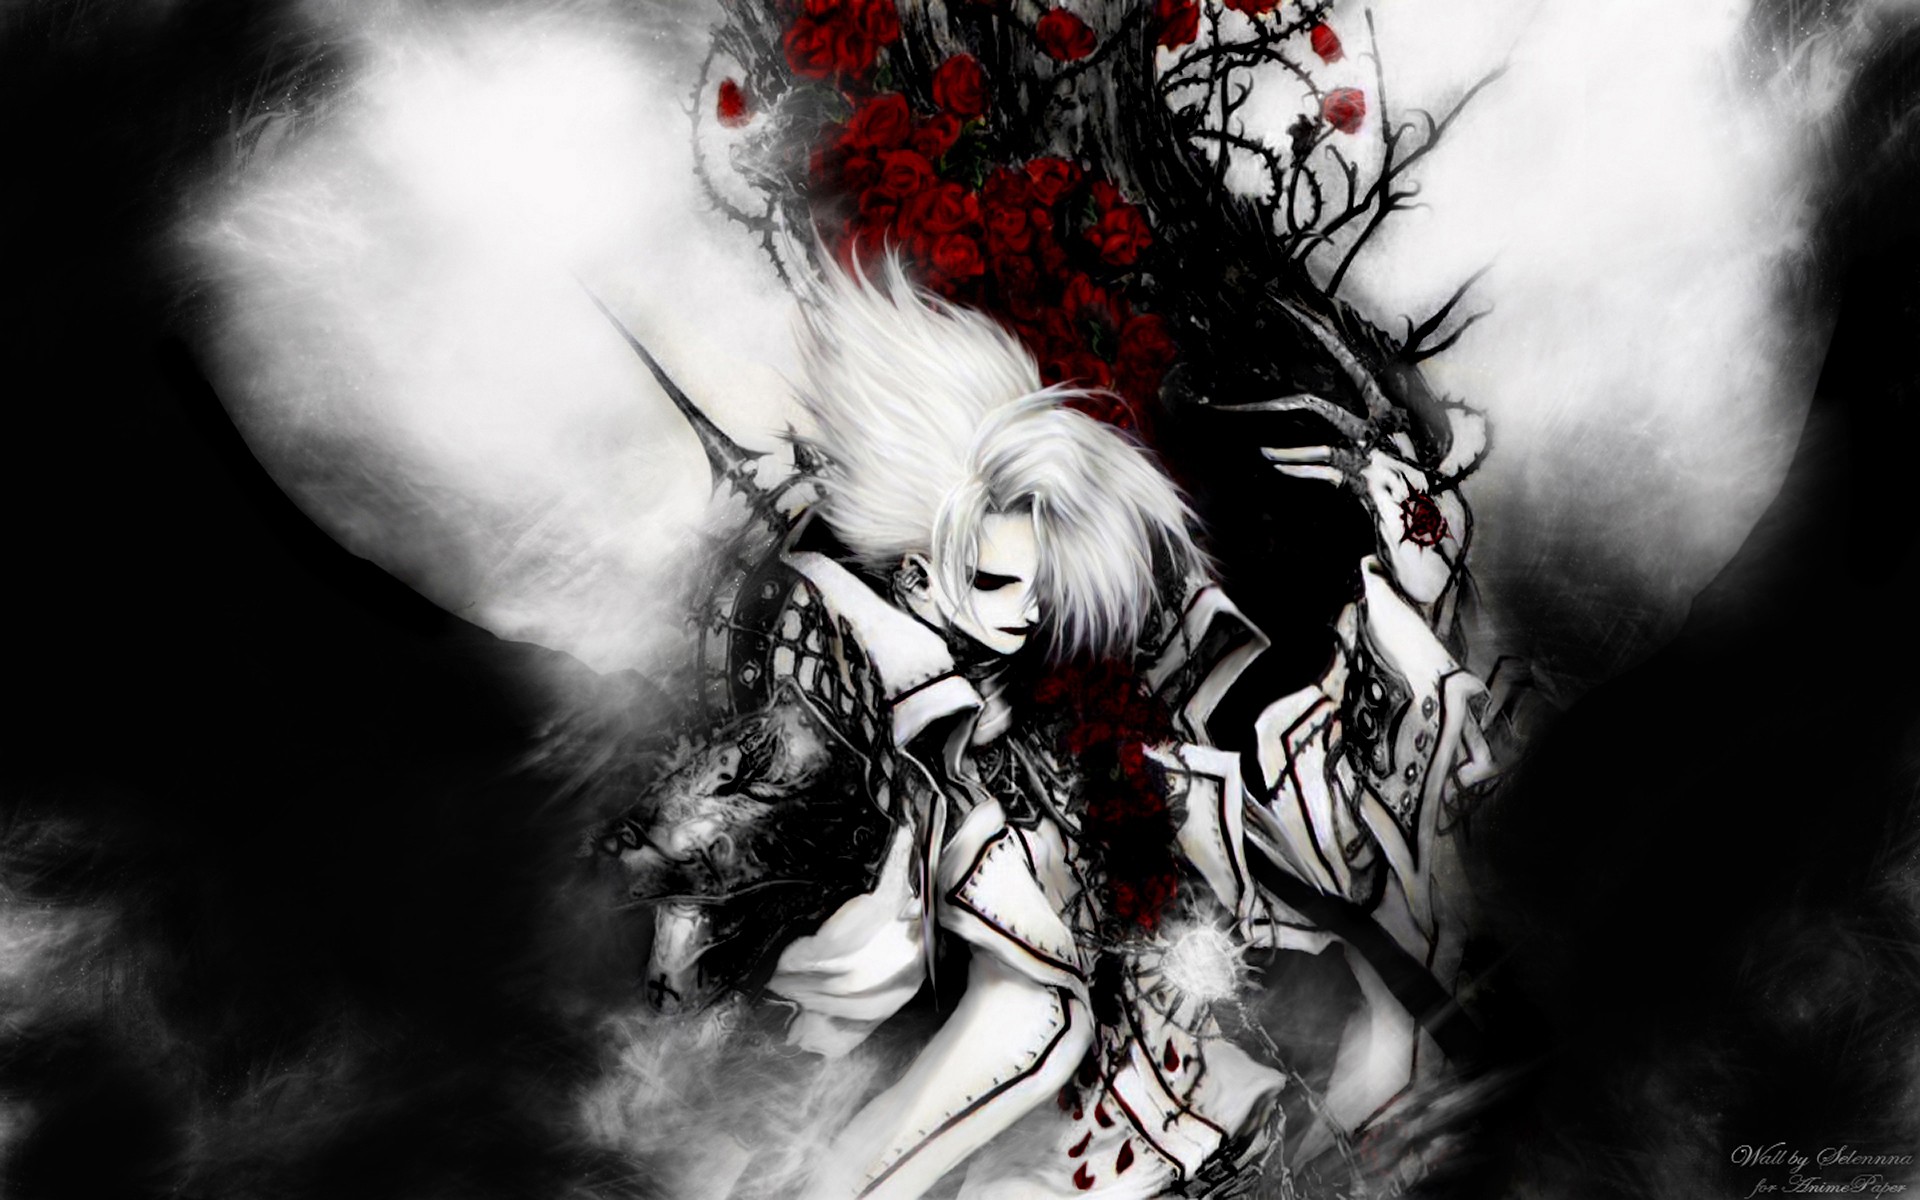 Published at 1920 1200 in Trinity Blood Anime Manga Wallpaper 1920x1200